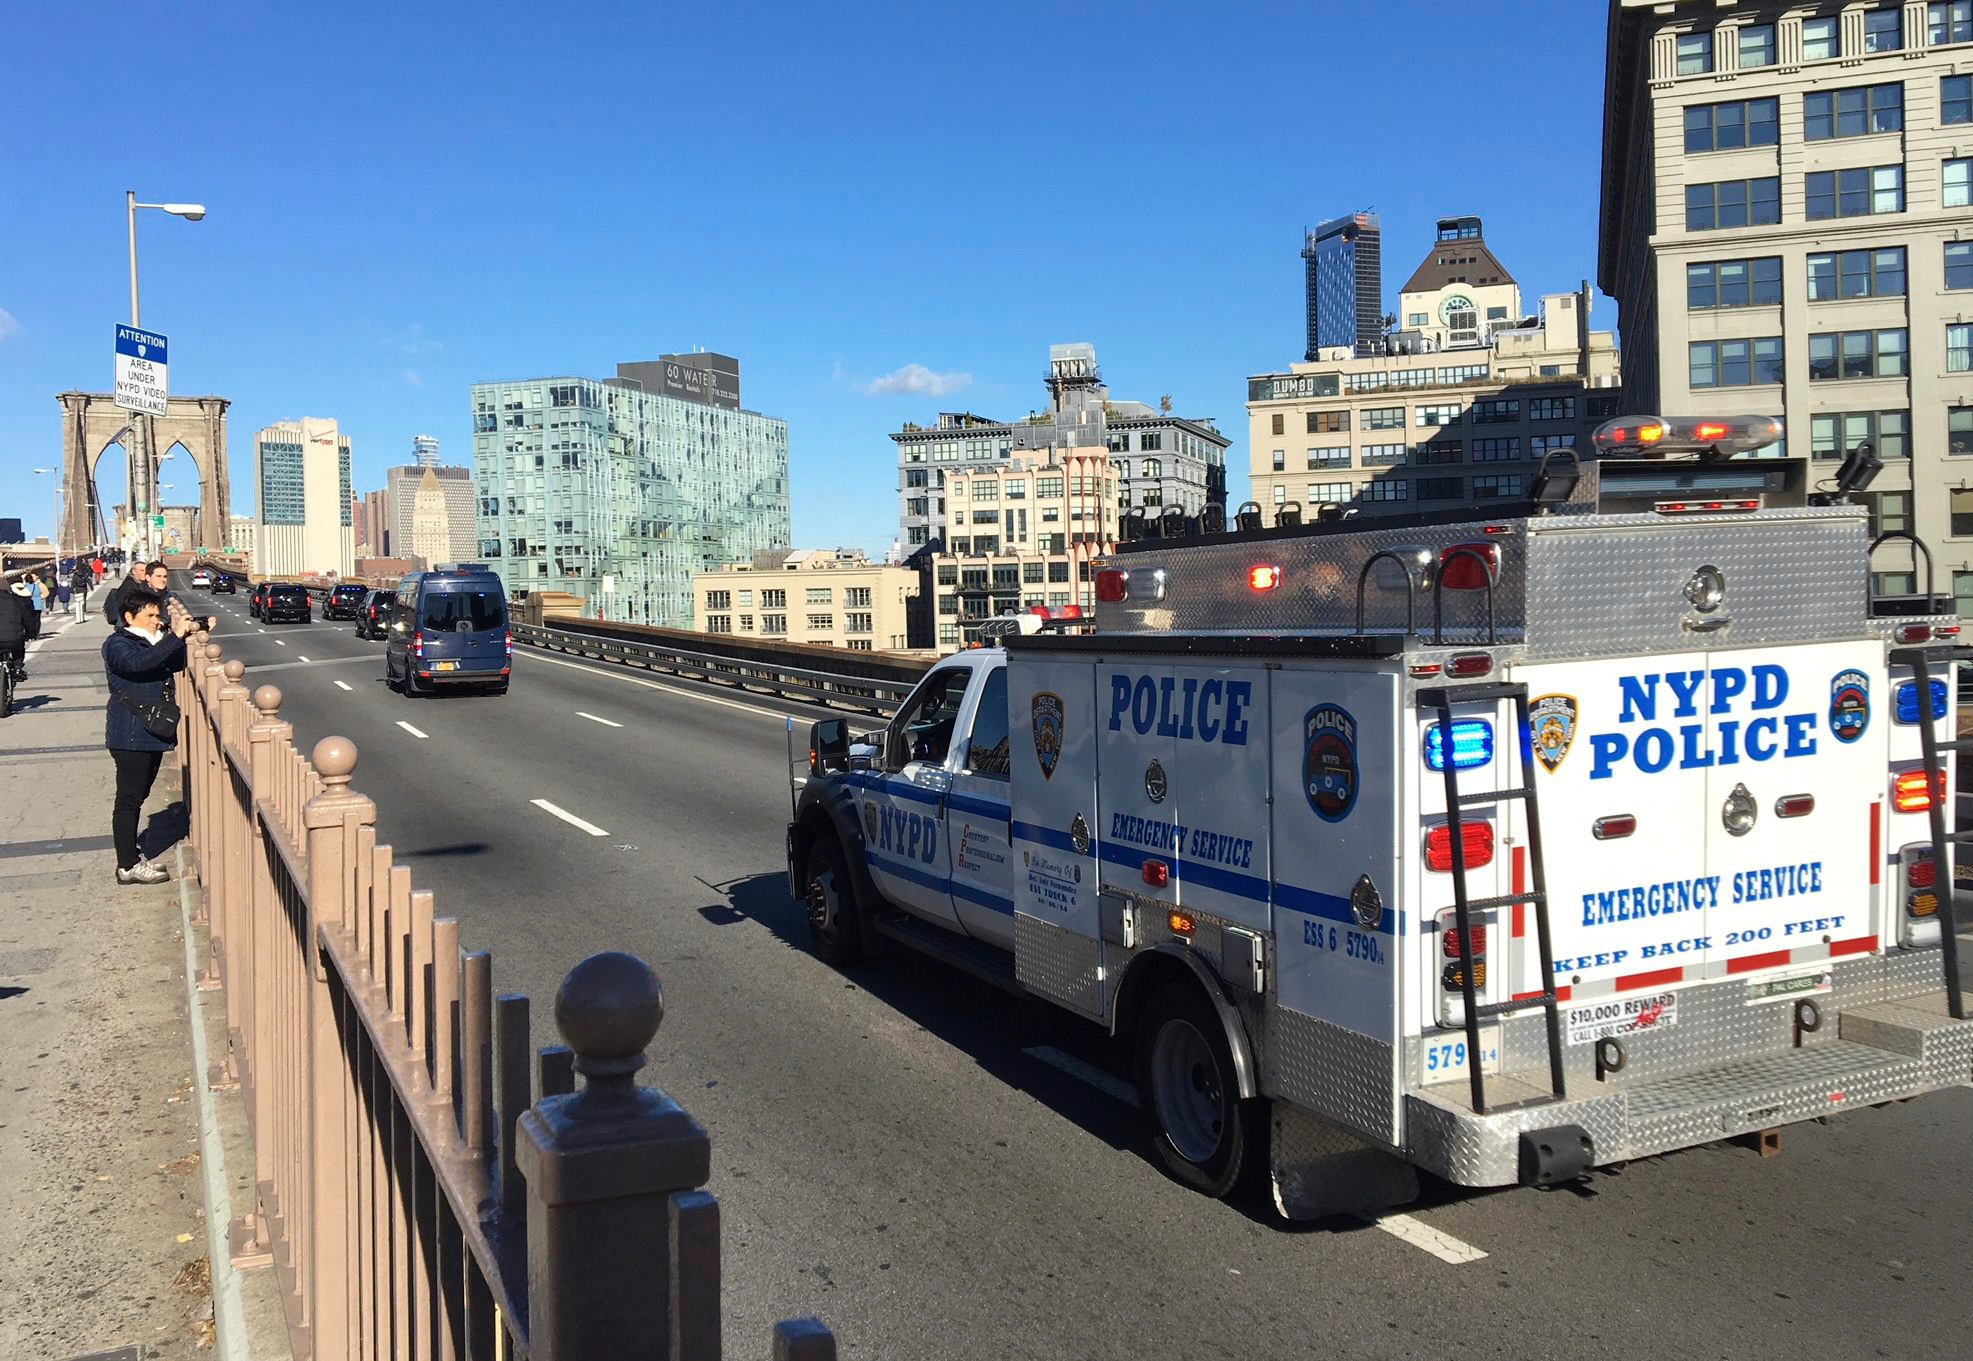 In this Oct. 30, 2018 photo, an NYPD emergency service vehicle brings up the rear of a heavily armed federal law enforcement caravan carrying notorious Mexican drug lord Joaquin "El Chapo" Guzman back to a lower Manhattan jail following a pretrial hearing for his drug conspiracy case at a Brooklyn courthouse. Authorities have been closing the Brooklyn Bridge to traffic when it transports Guzman to and from court, causing logistical issues that have led them to consider alternatives for how to jail him during an upcoming trial that could last three months or longer. (AP Photo/Tom Hays) El Chapo Prosecution